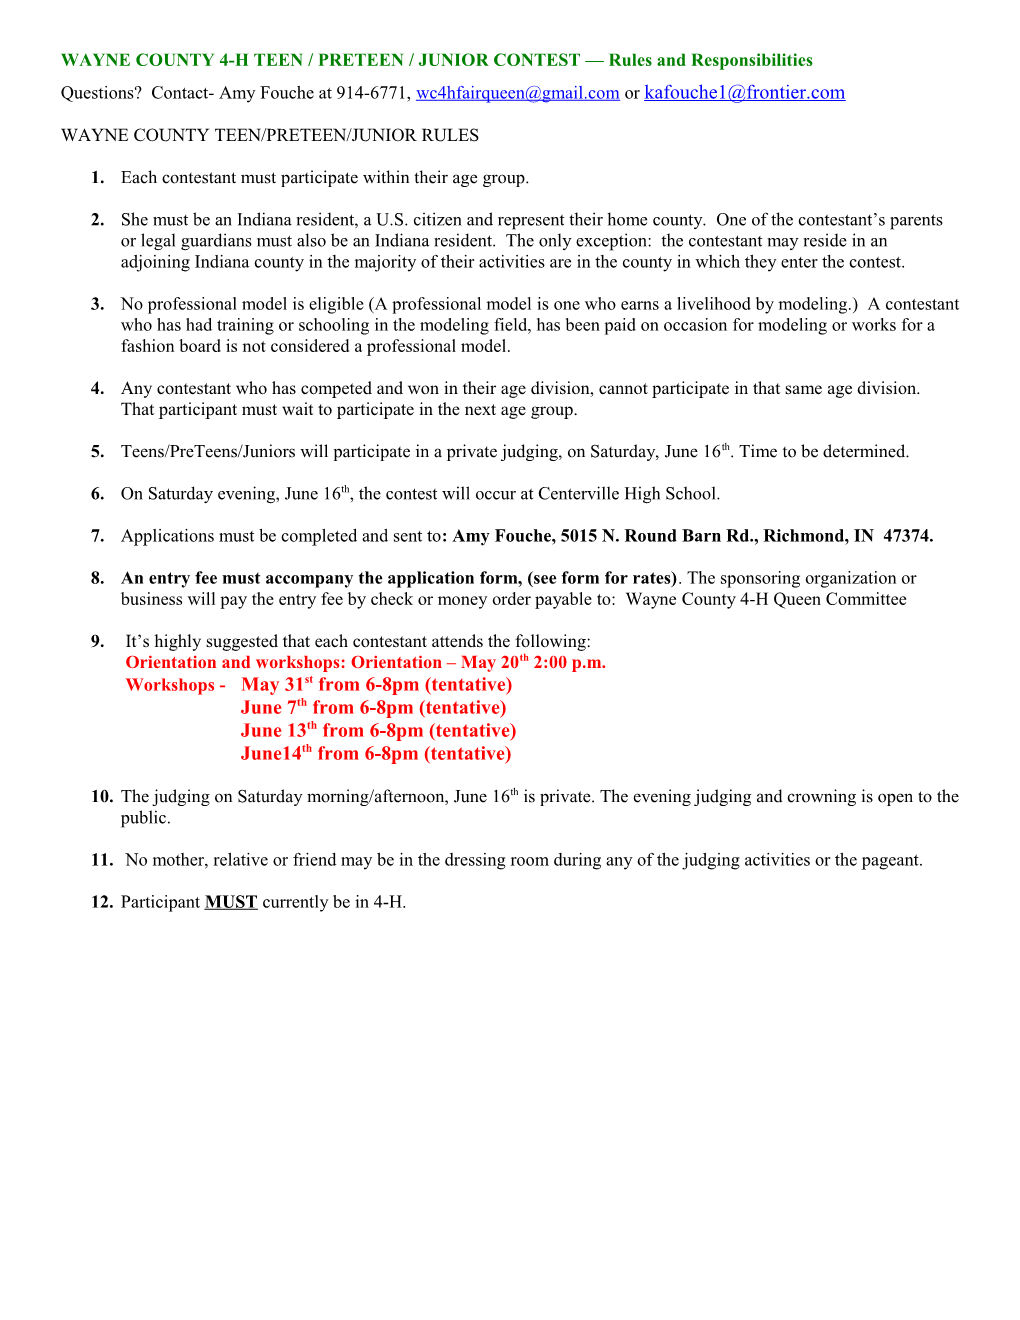 WAYNE COUNTY 4-H QUEEN CONTEST Rules and Responsibilities